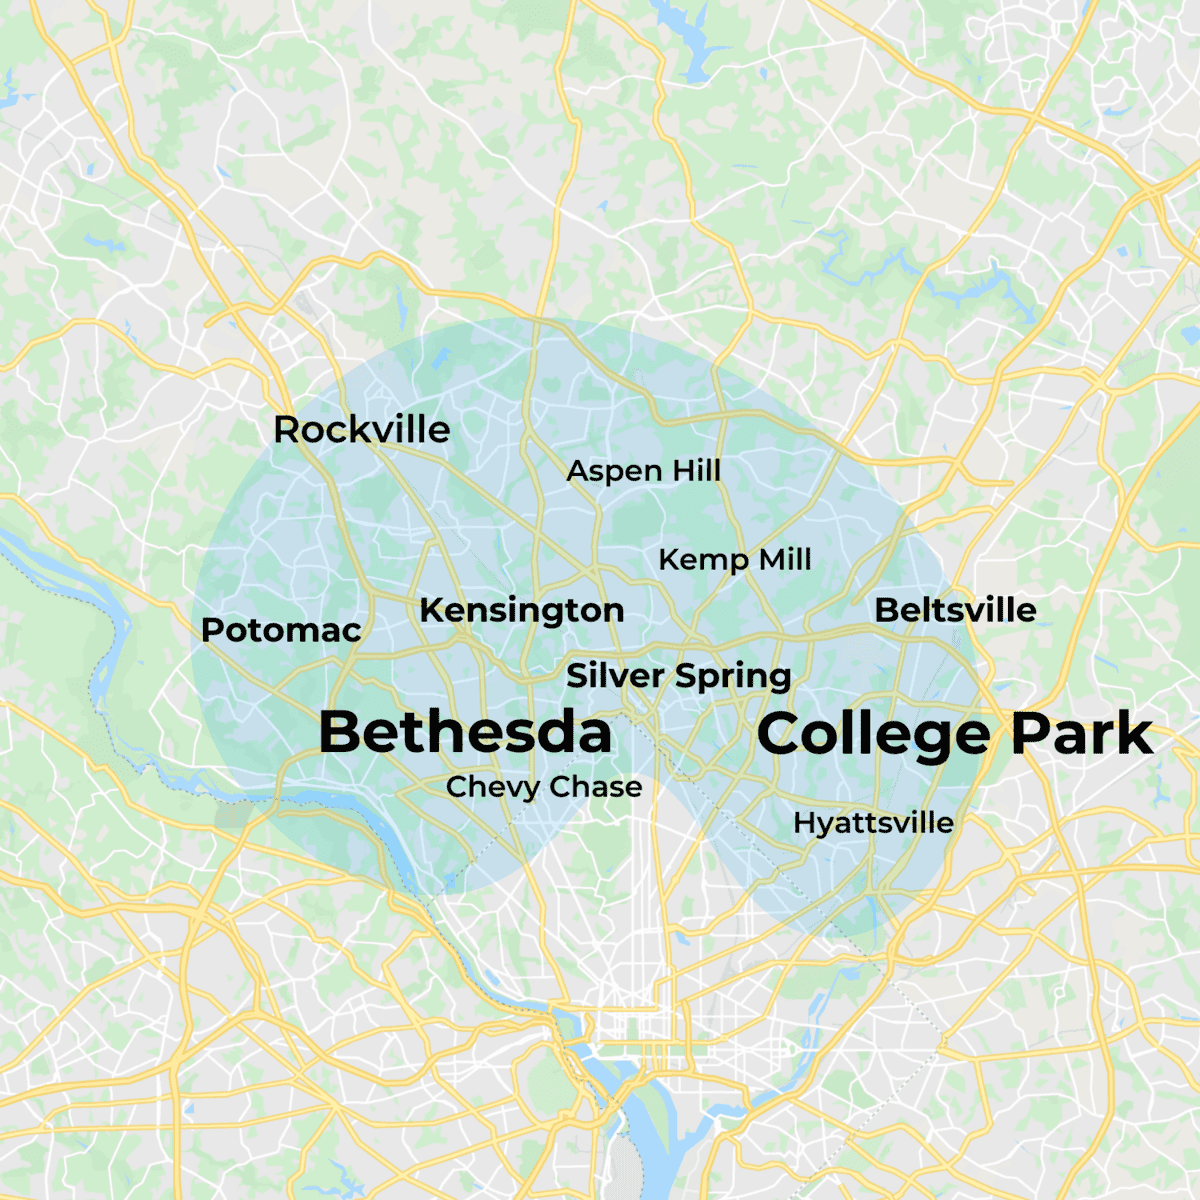 MovementX physical therapy in Maryland location service coverage map of Bethesda, College Park, Silver Spring, Kensington, Rockville, Potomac, Beltsville, Kemp Hill, Aspen Hill, and Chevy Chase near Washington, D.C.